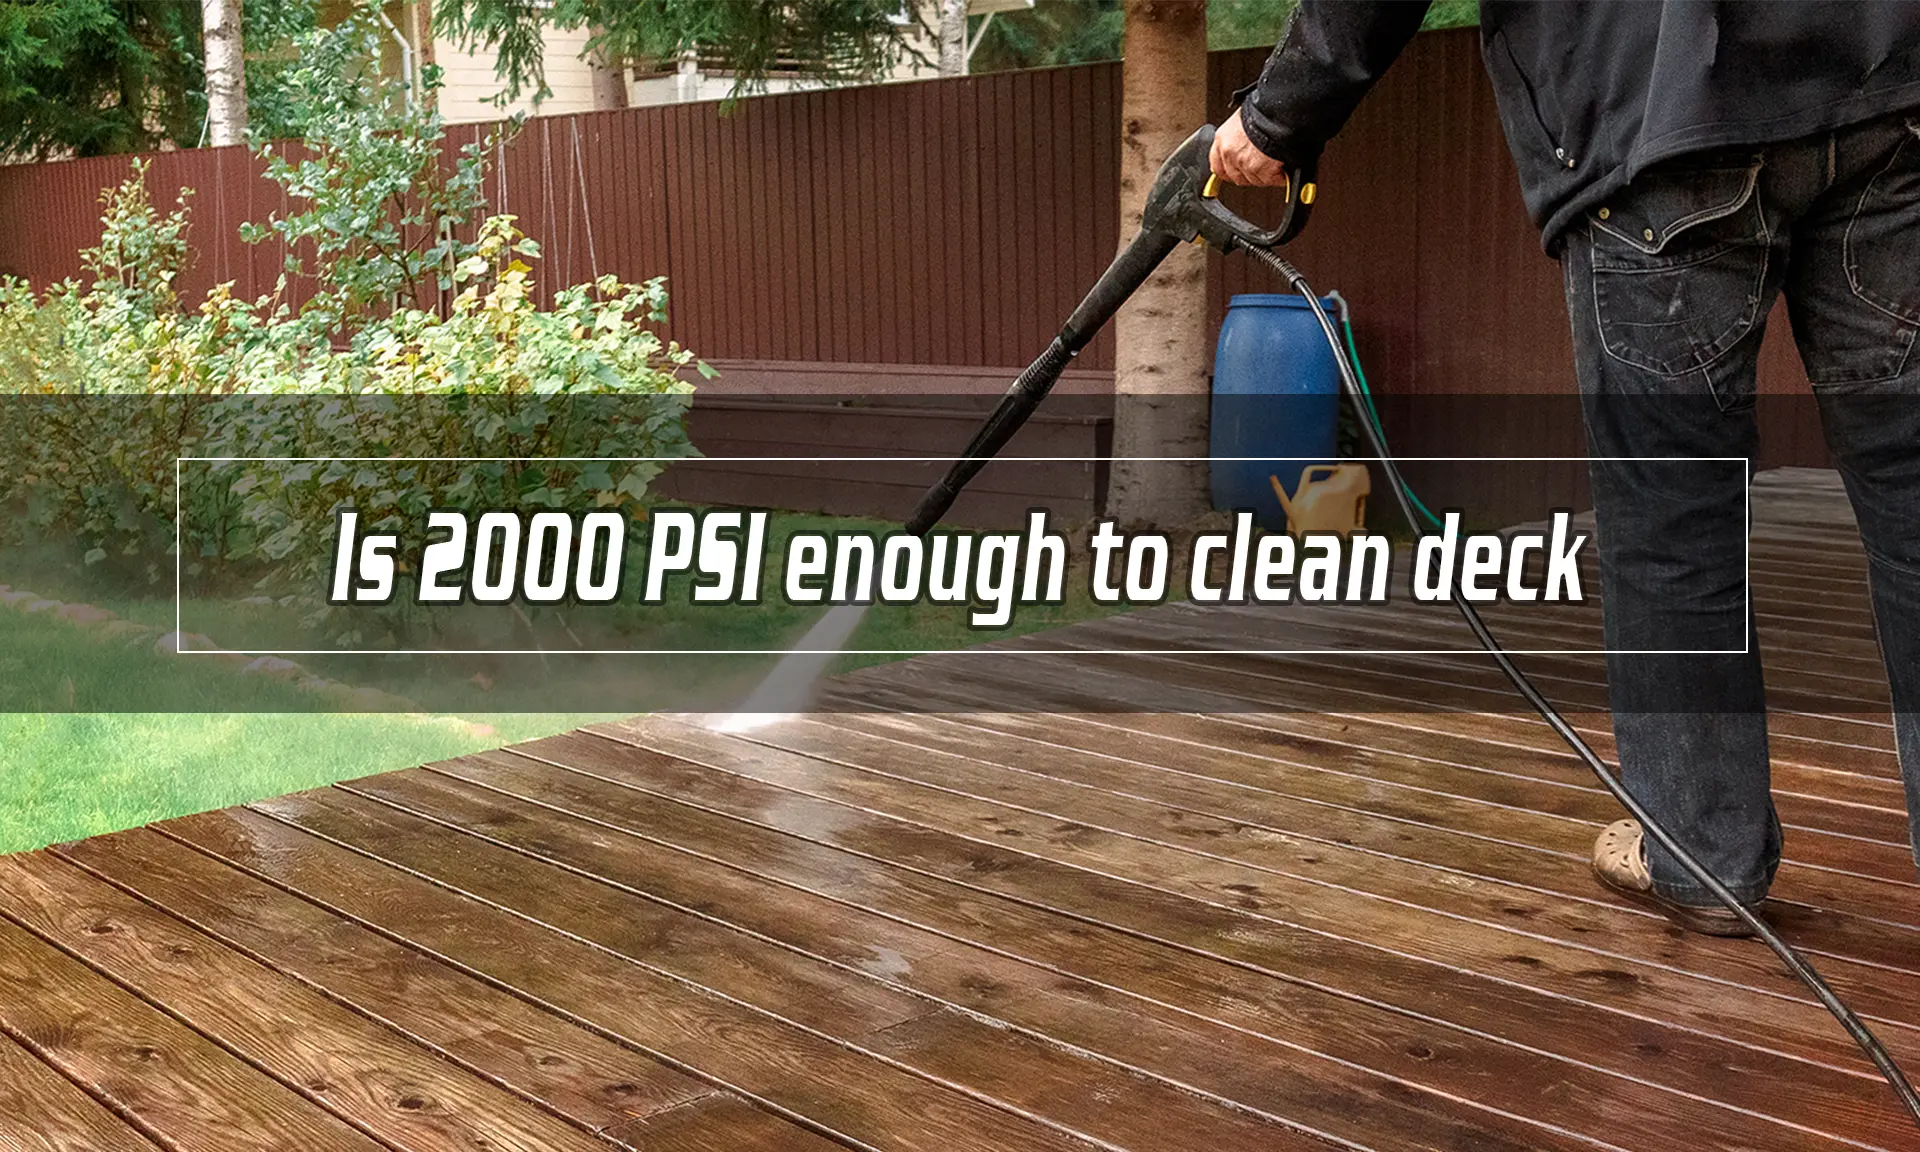 Is 2000 PSI enough to clean deck